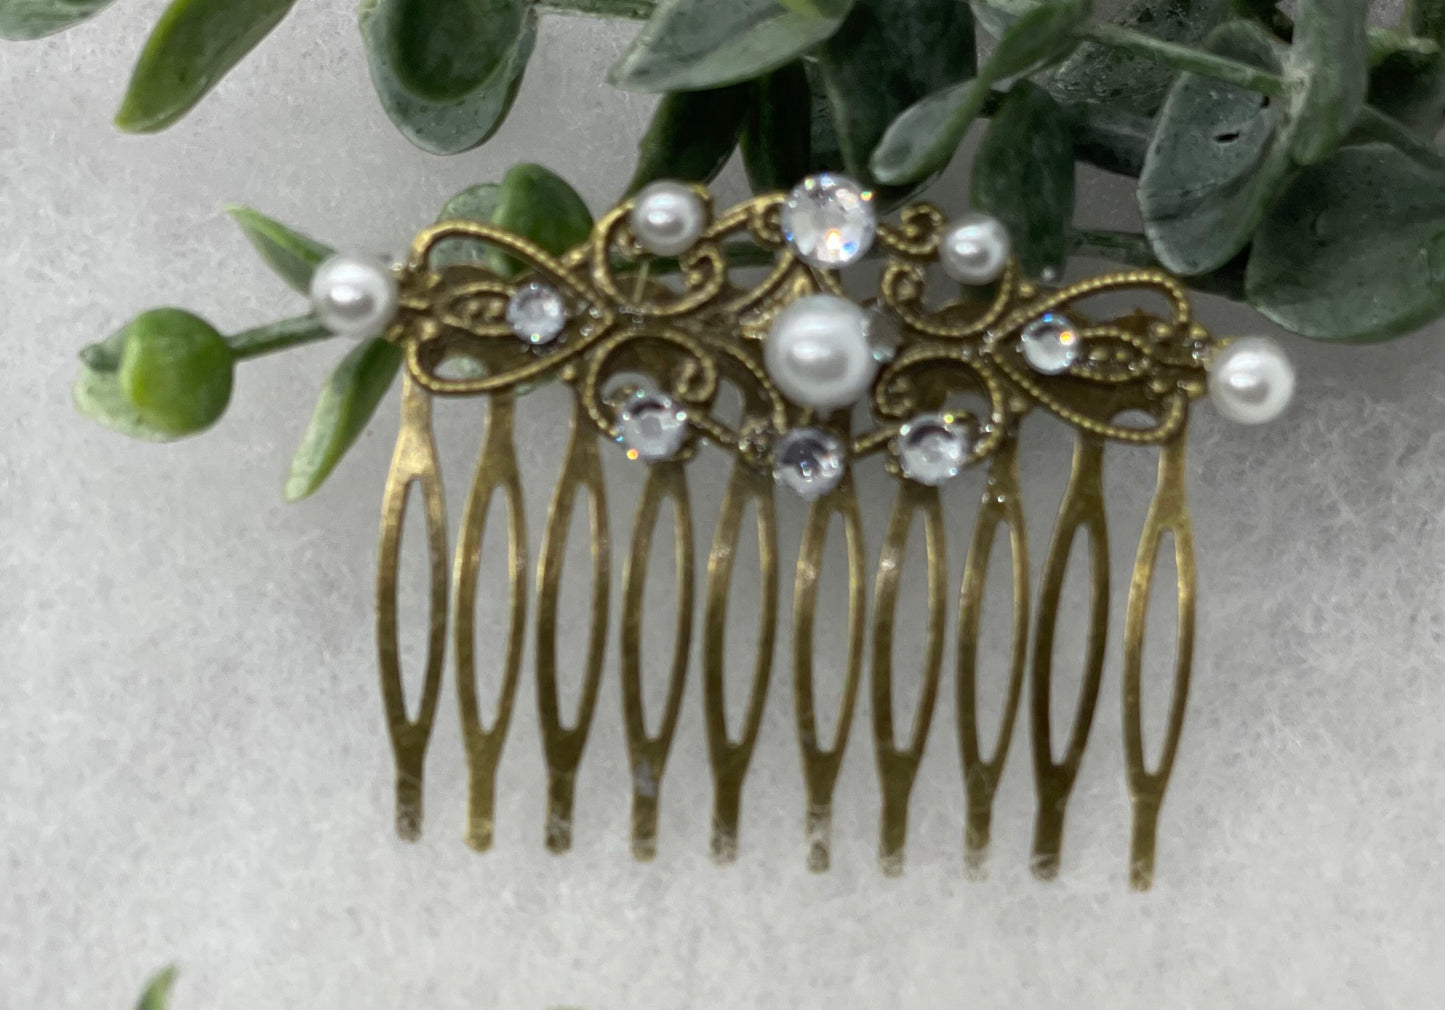 White crystal rhinestone pearl vintage style antique hair accessories gift birthday event formal bridesmaid  2.5” Metal side Comb #252